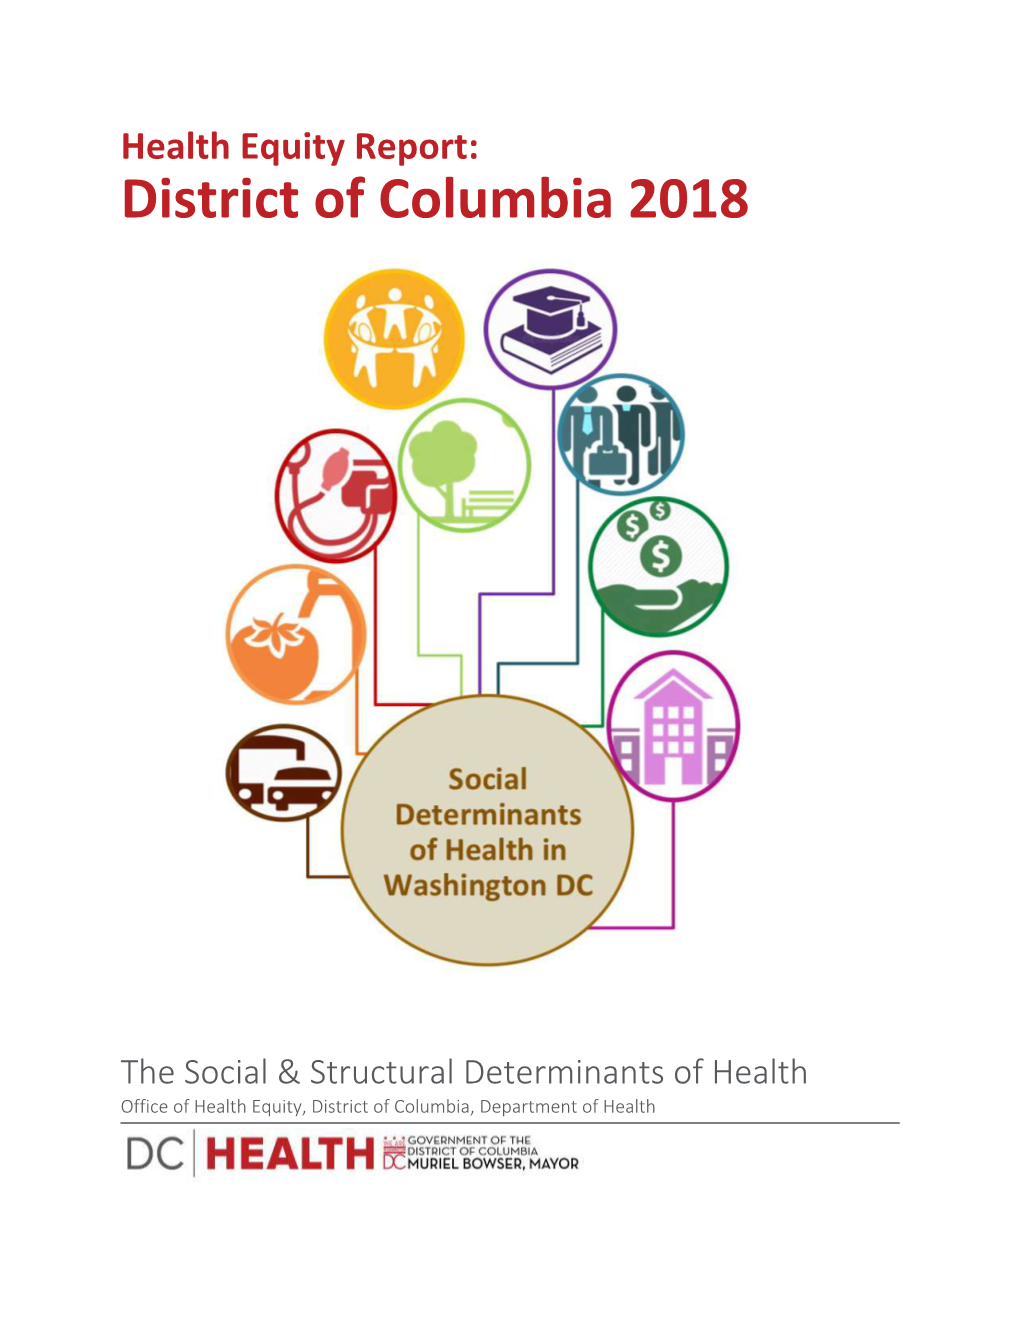 Health Equity Report: District of Columbia 2018